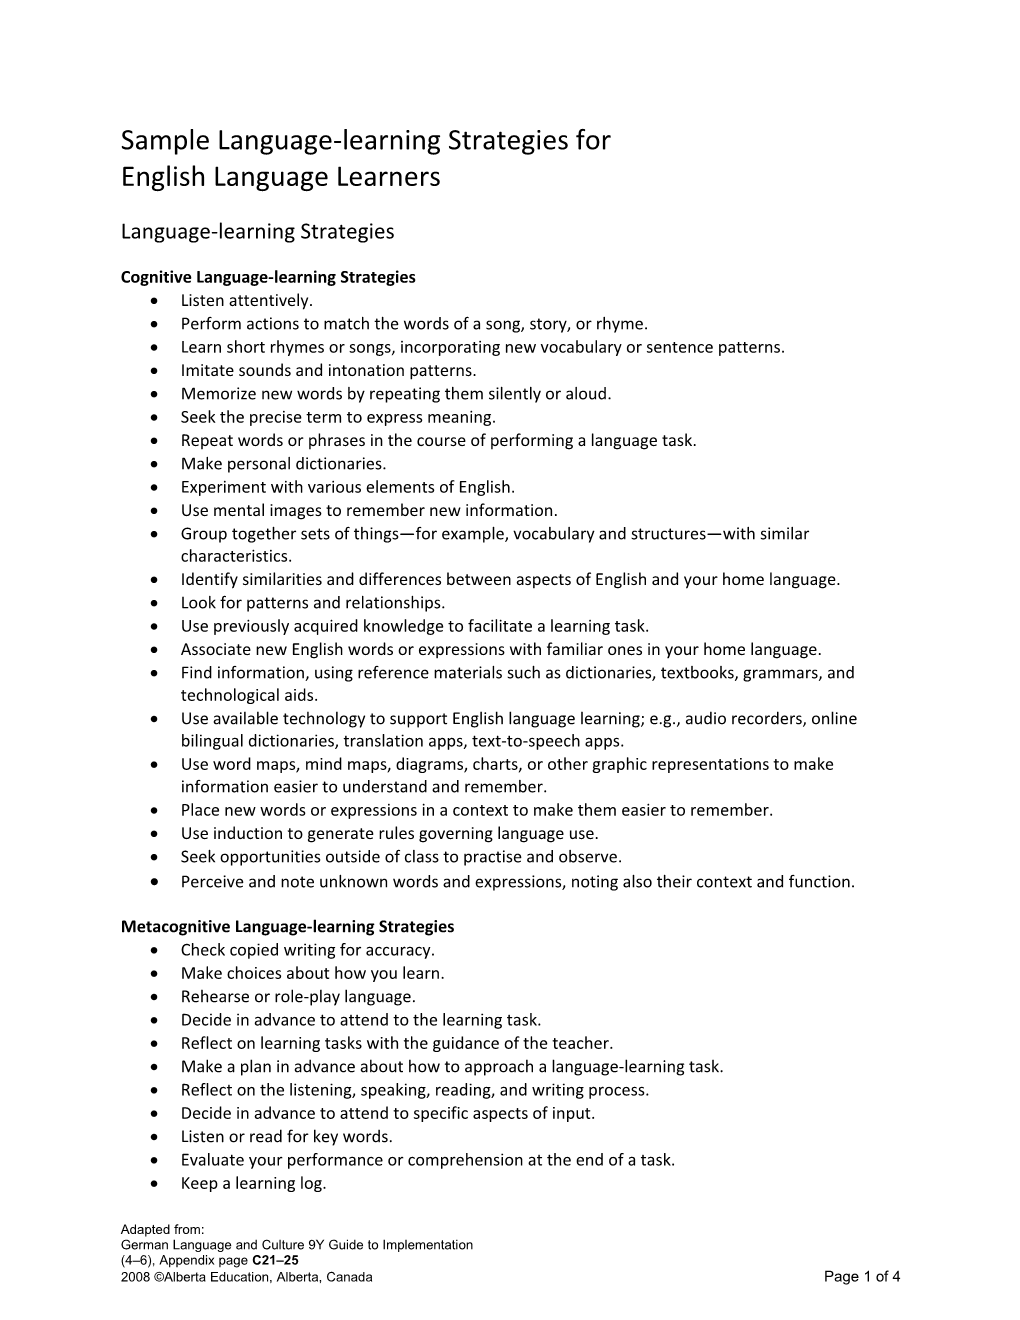 Additional Assessments for English Language Learners